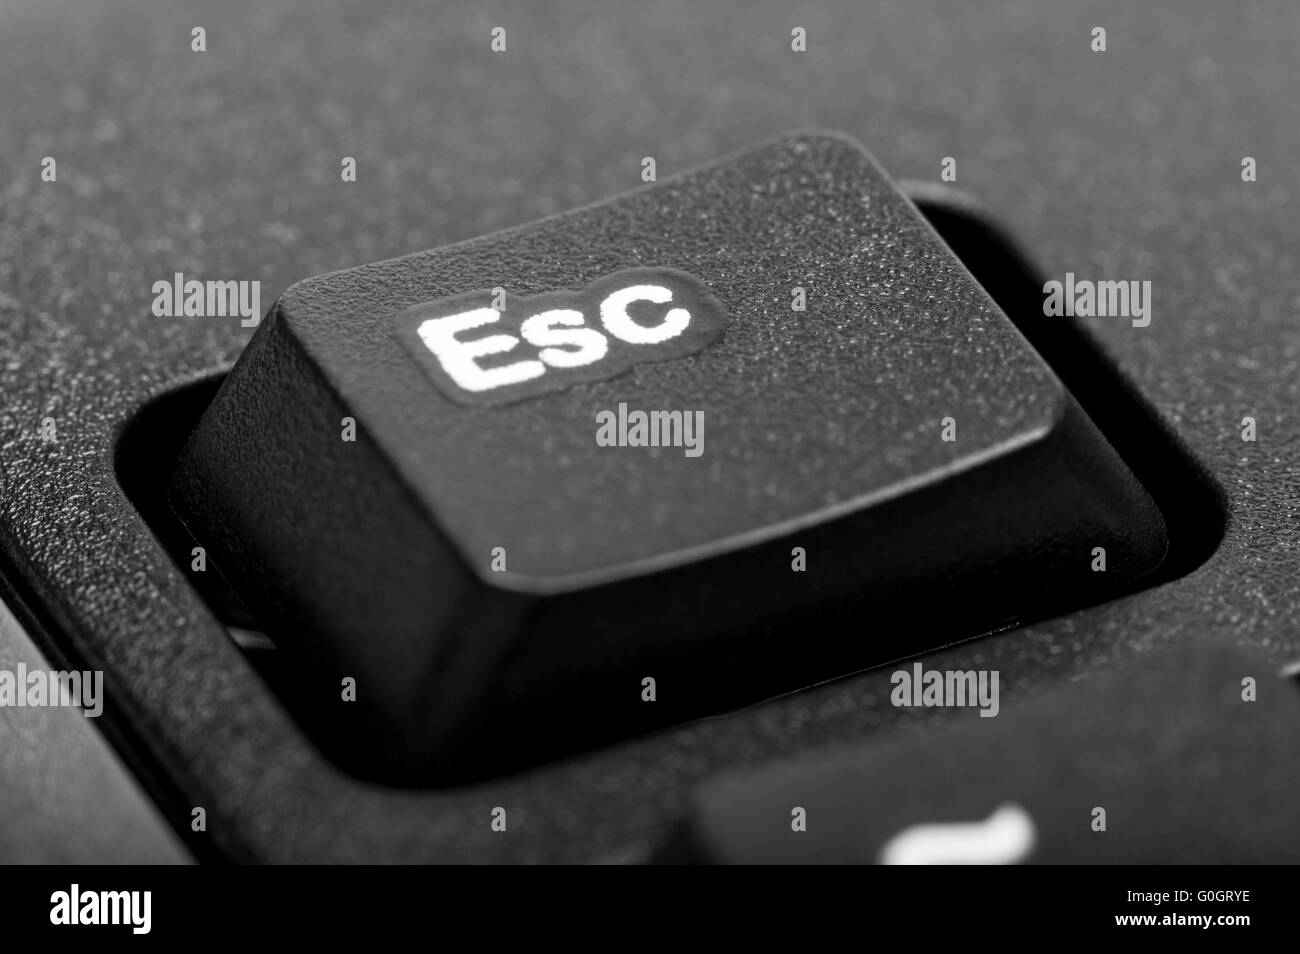 Electronic collection - detail black computer keyboard with key esc Stock Photo